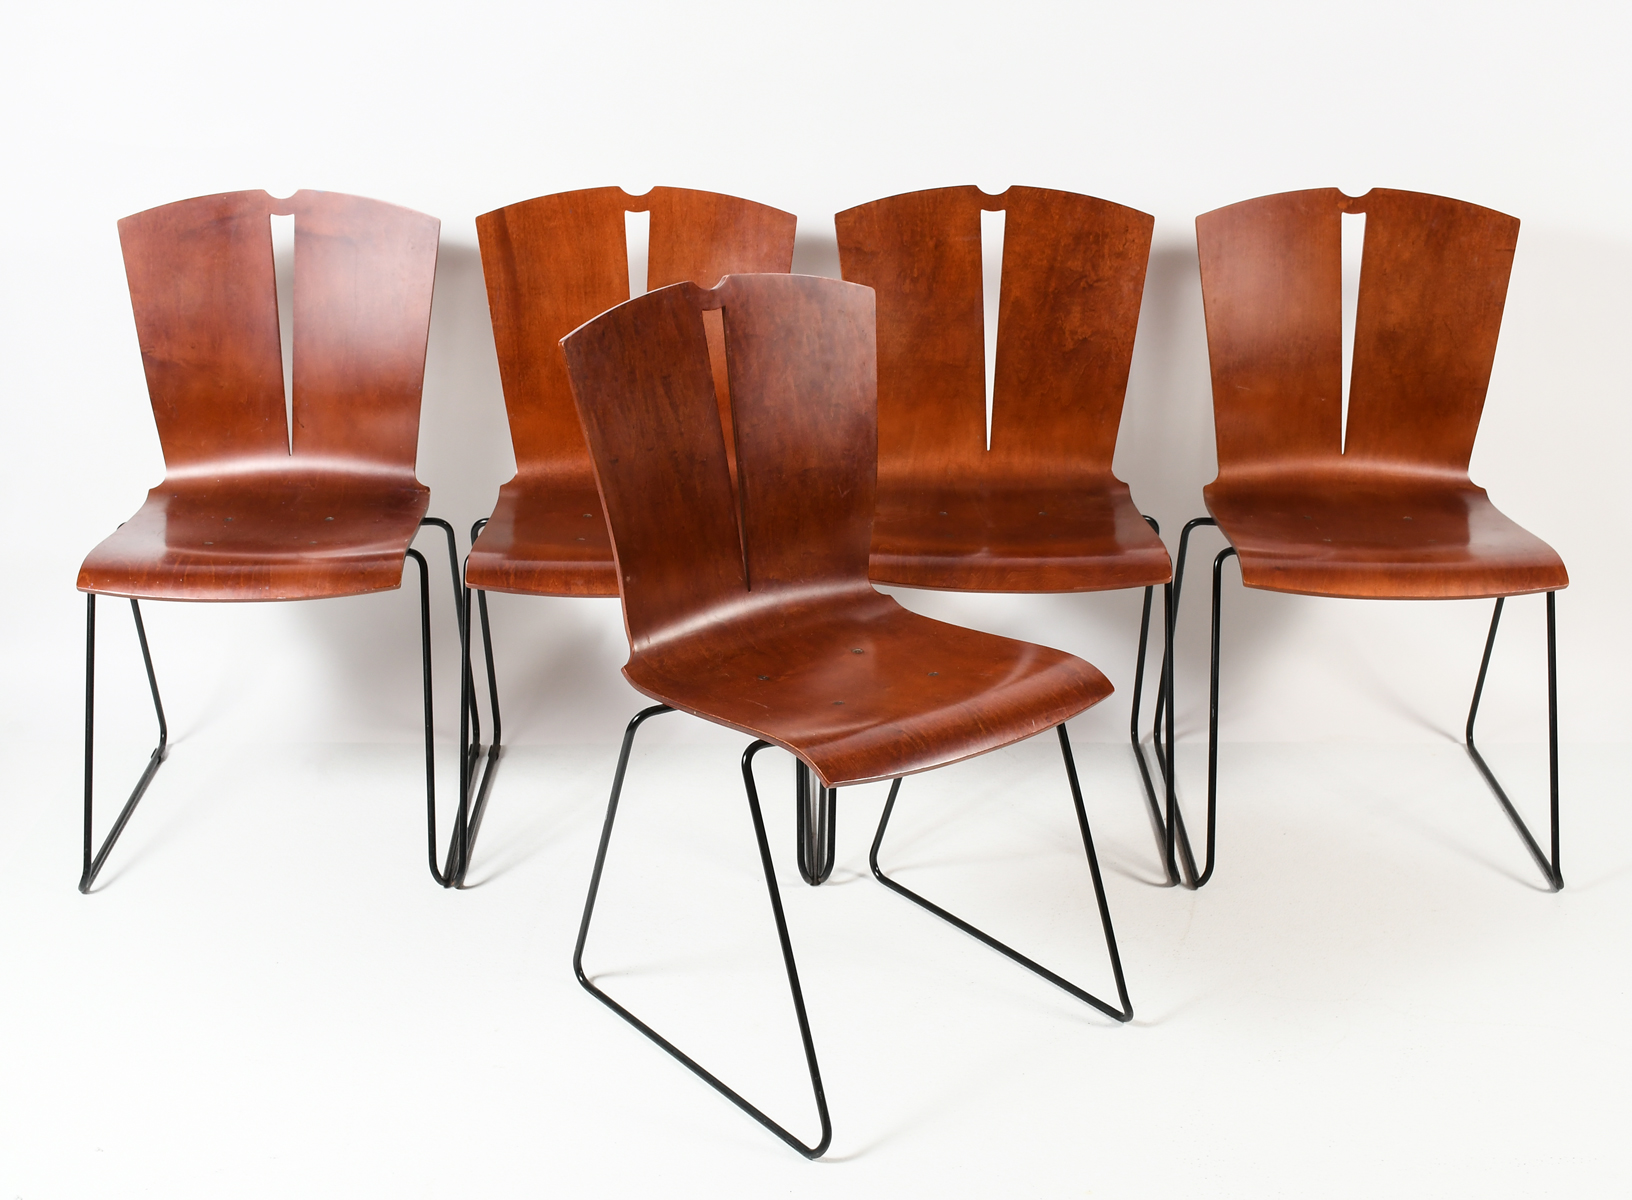 5 MID-CENTURY STYLE STACKING CHAIRS: